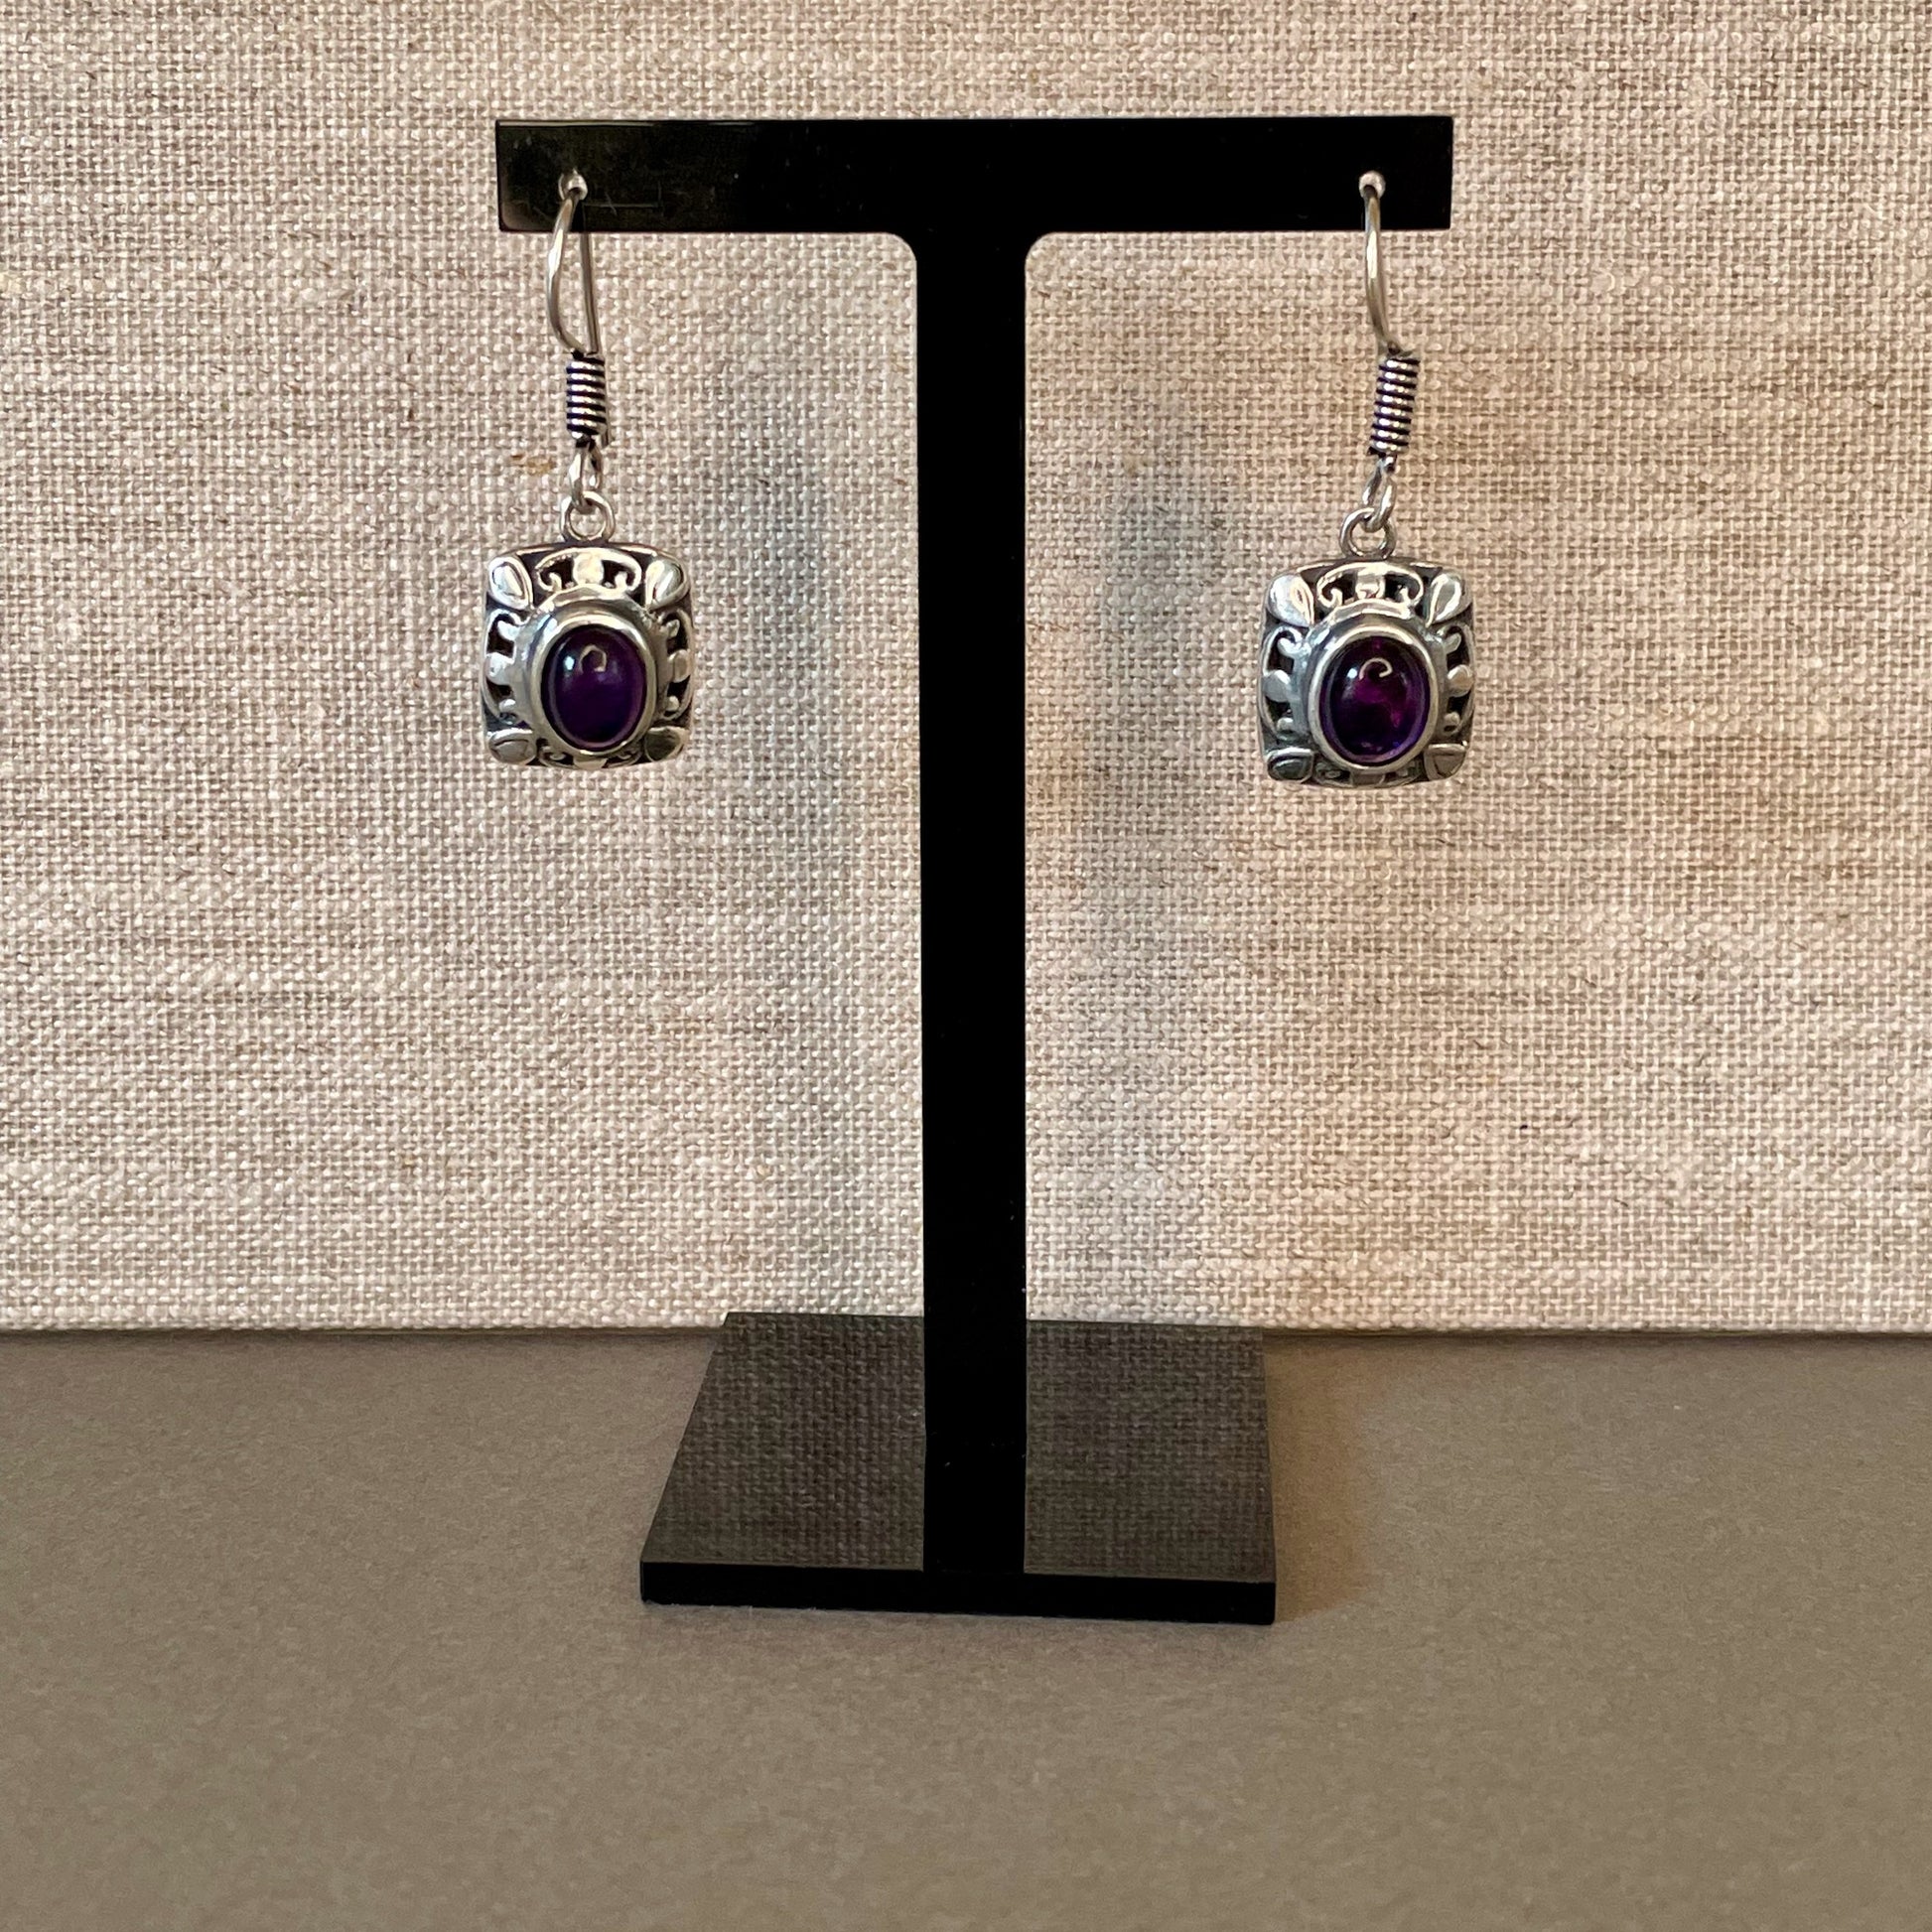 Fretwork Berber Silver Earrings with Oval purple Stones on stand